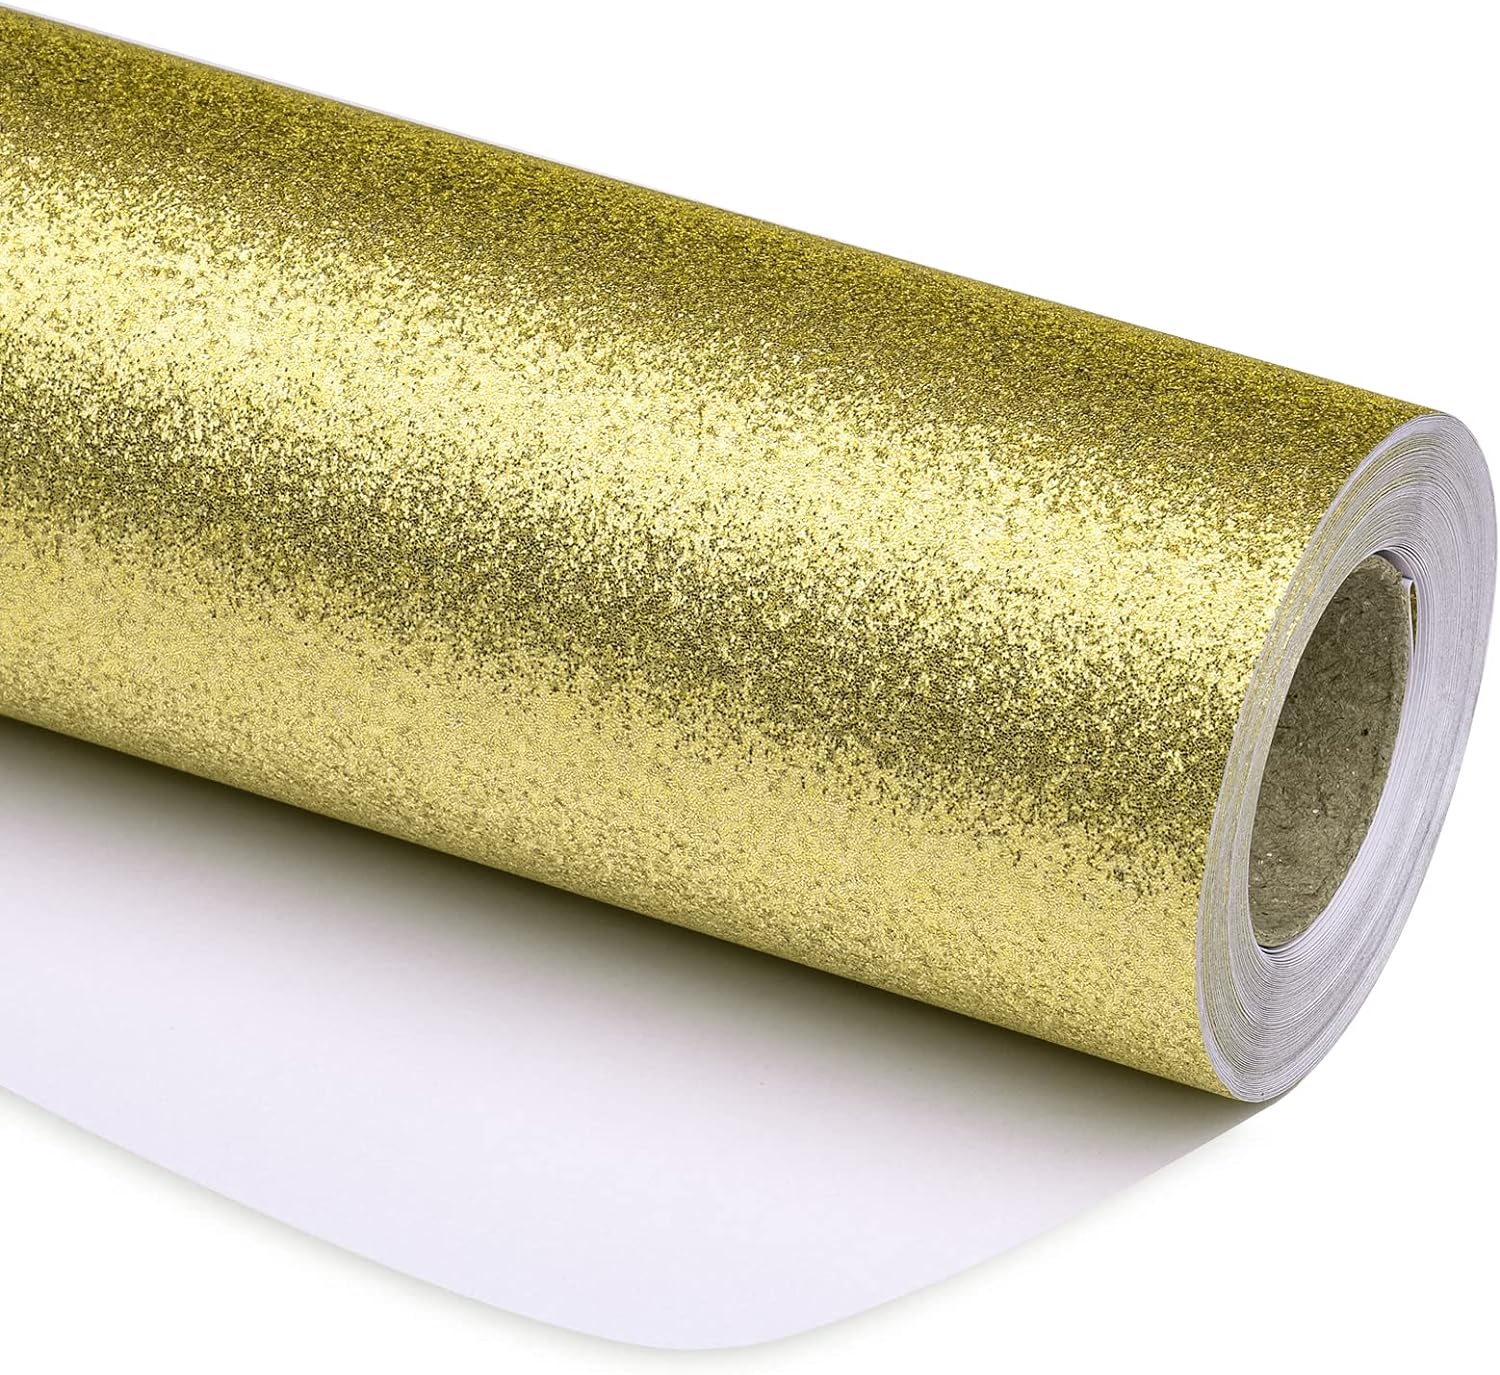 Bright Creations Gold Glitter Contact Paper Roll for DIY Crafts, Peel and Stick Art Decal for Scrapbooking (17.7 in x 16.5 ft)